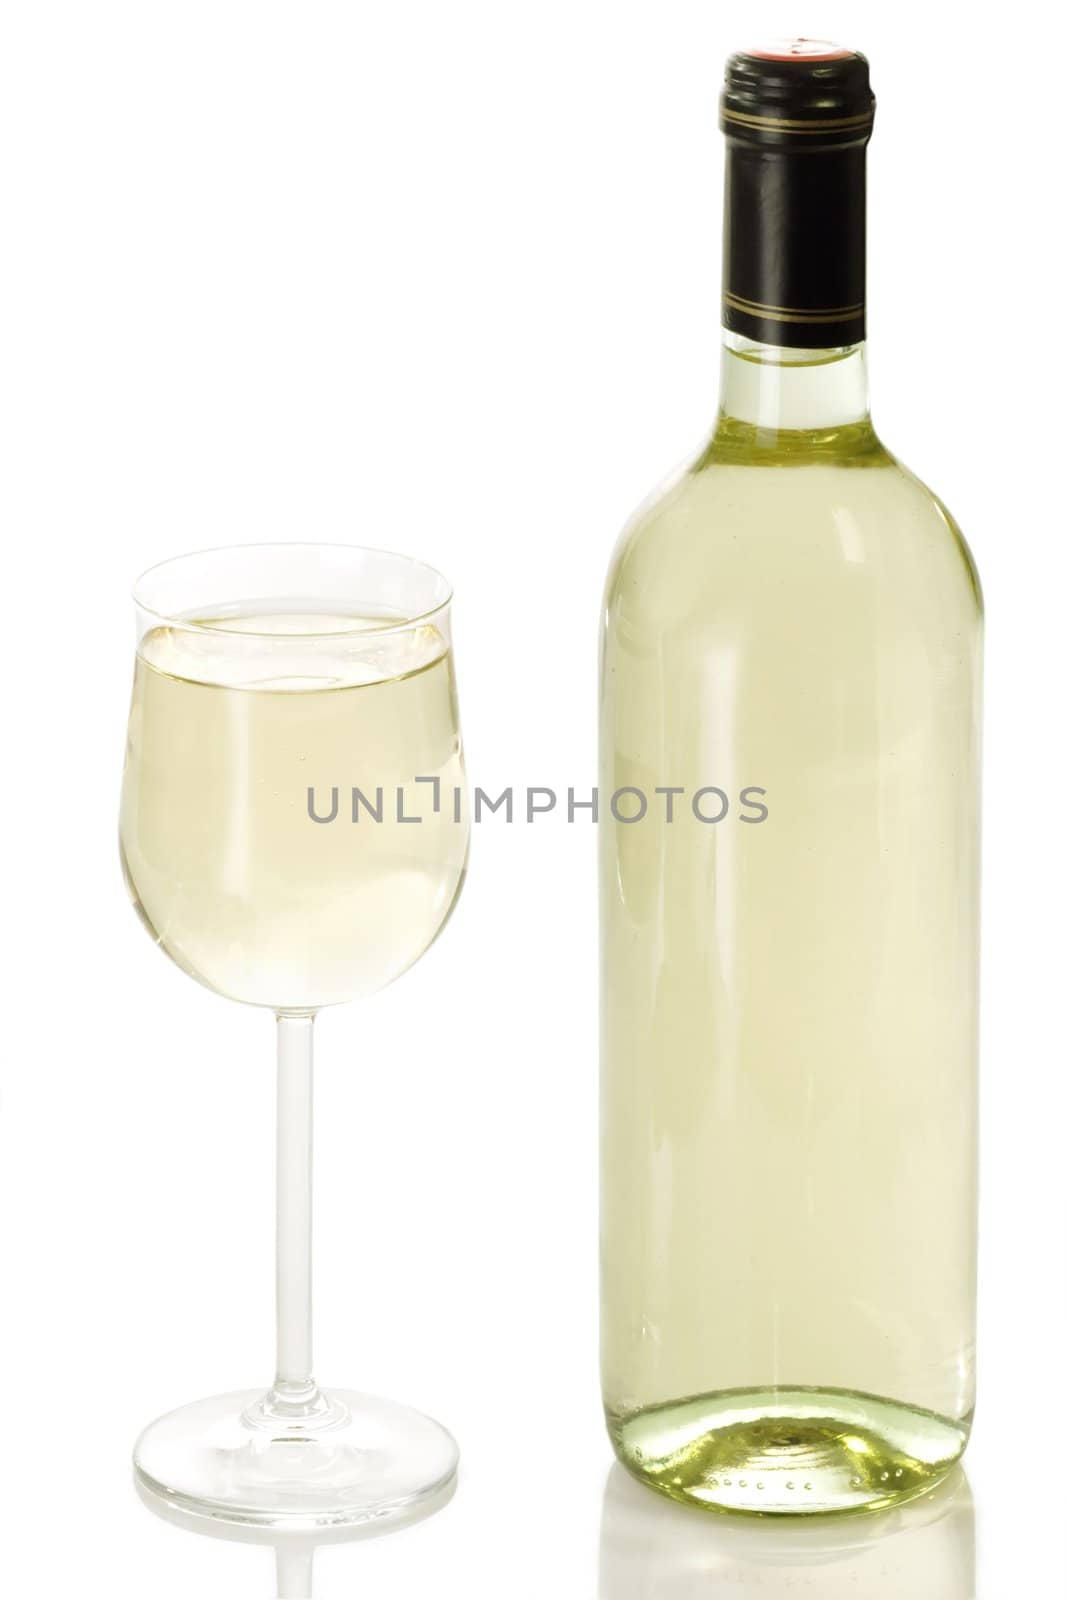 Wine bottle and glass by Teamarbeit